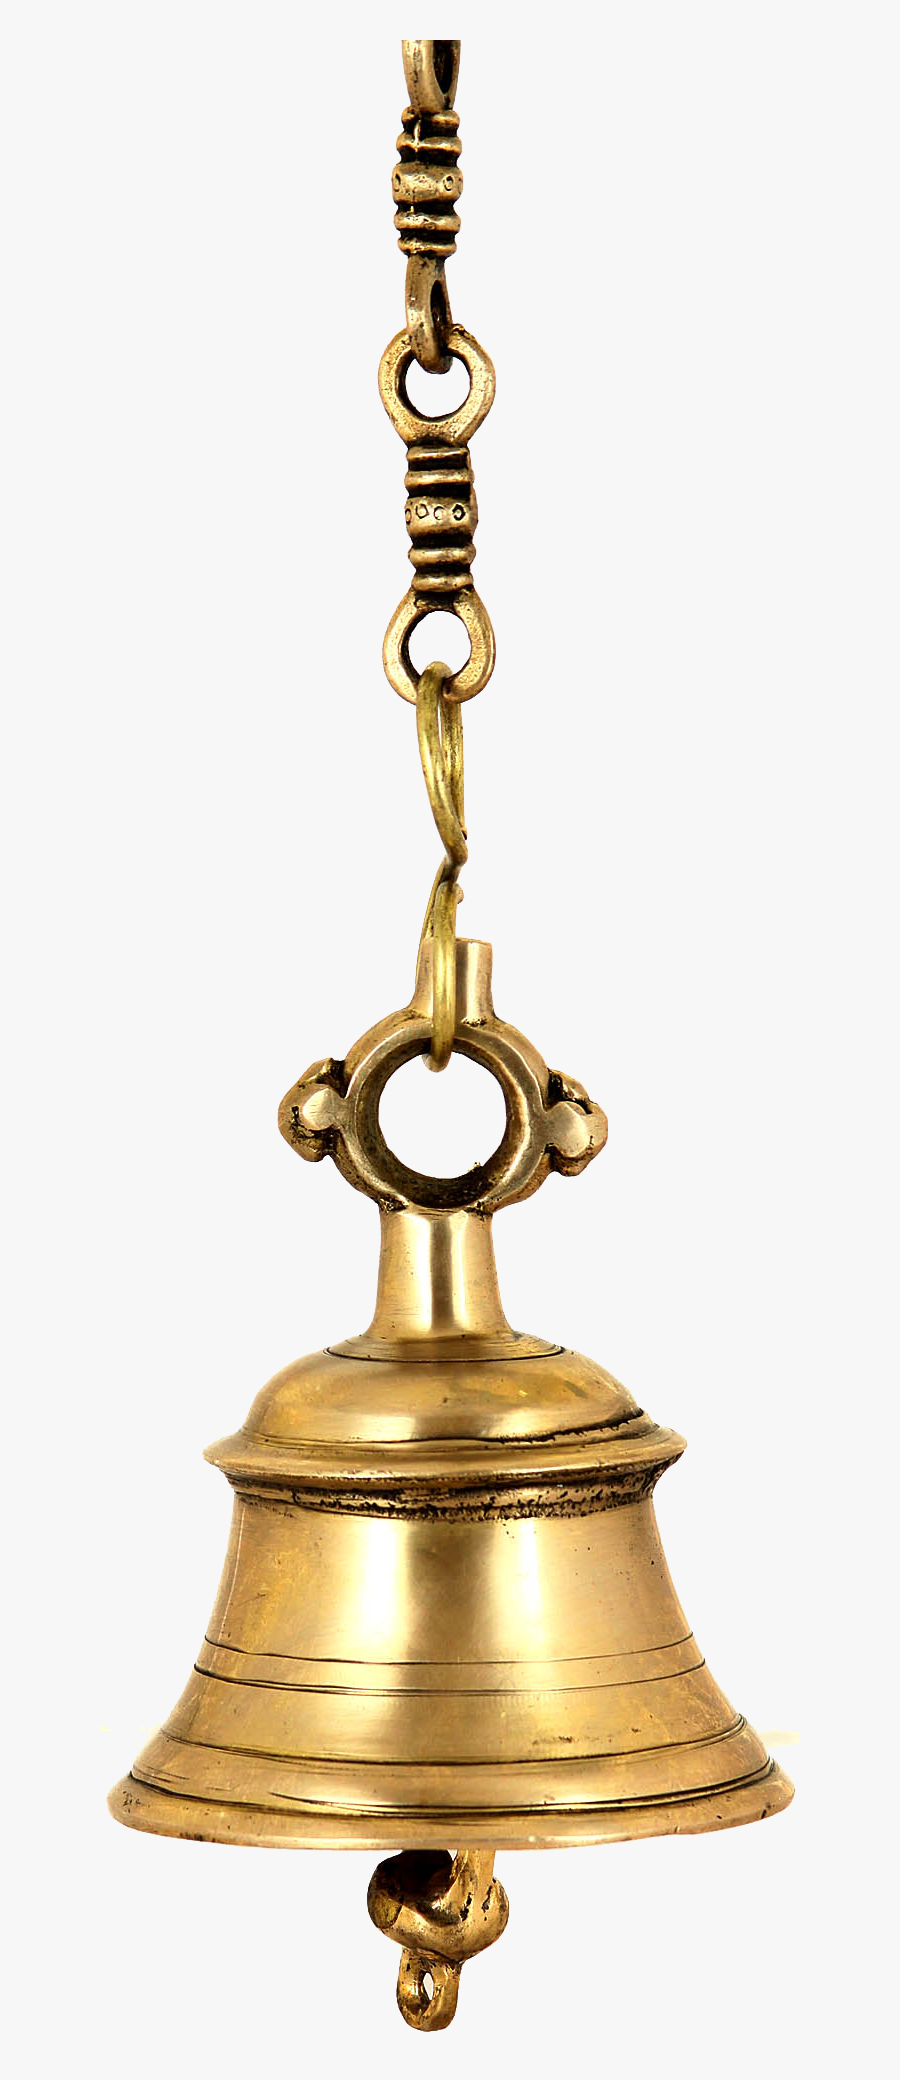 Temple Bell, - Hanging Temple Bell Png, Transparent Clipart